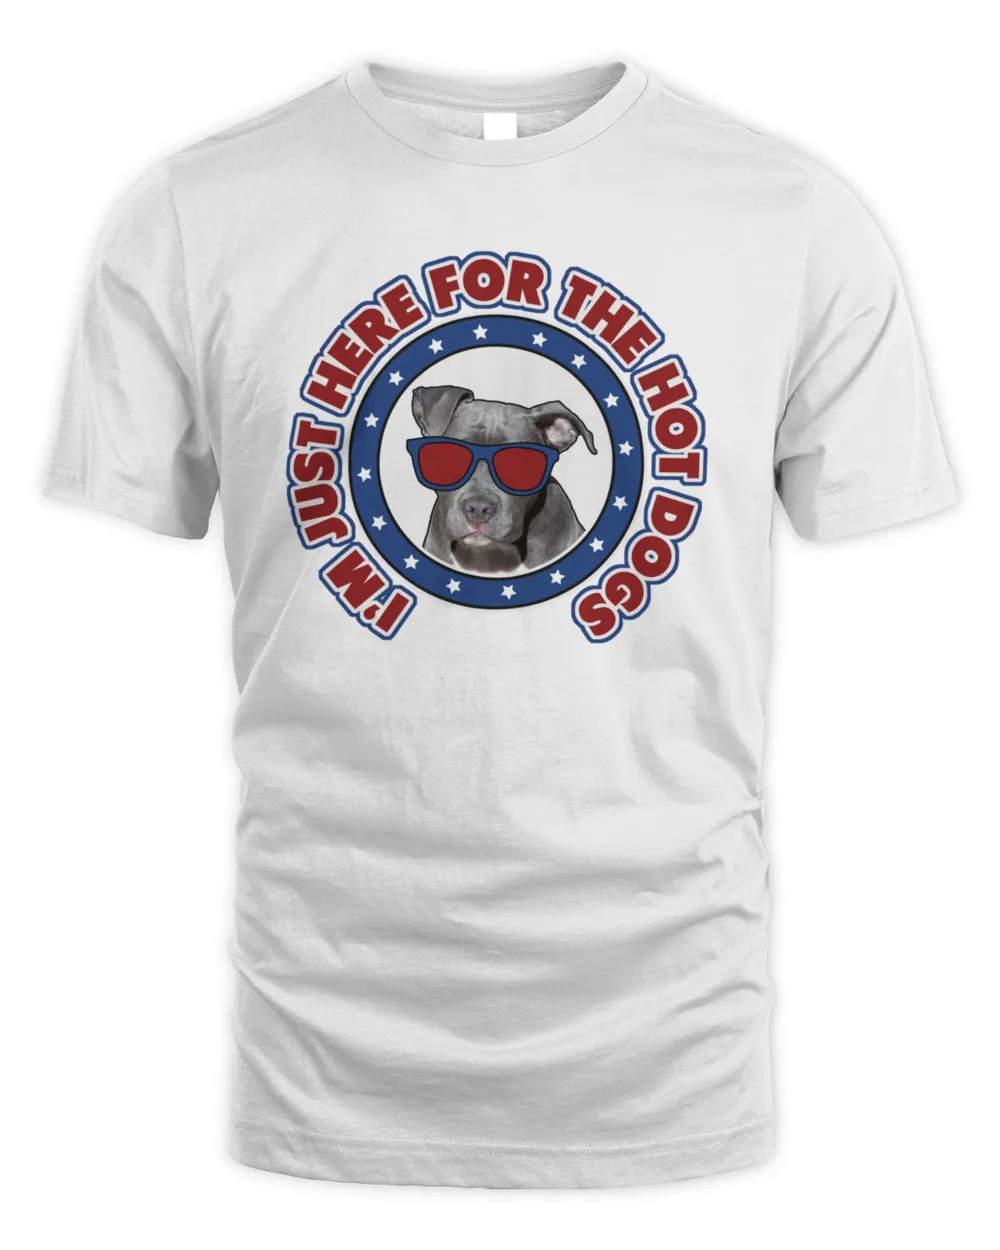 2018 July 4th Shirt Im Here for the Hot Dogs TShirt3207 T-Shirt